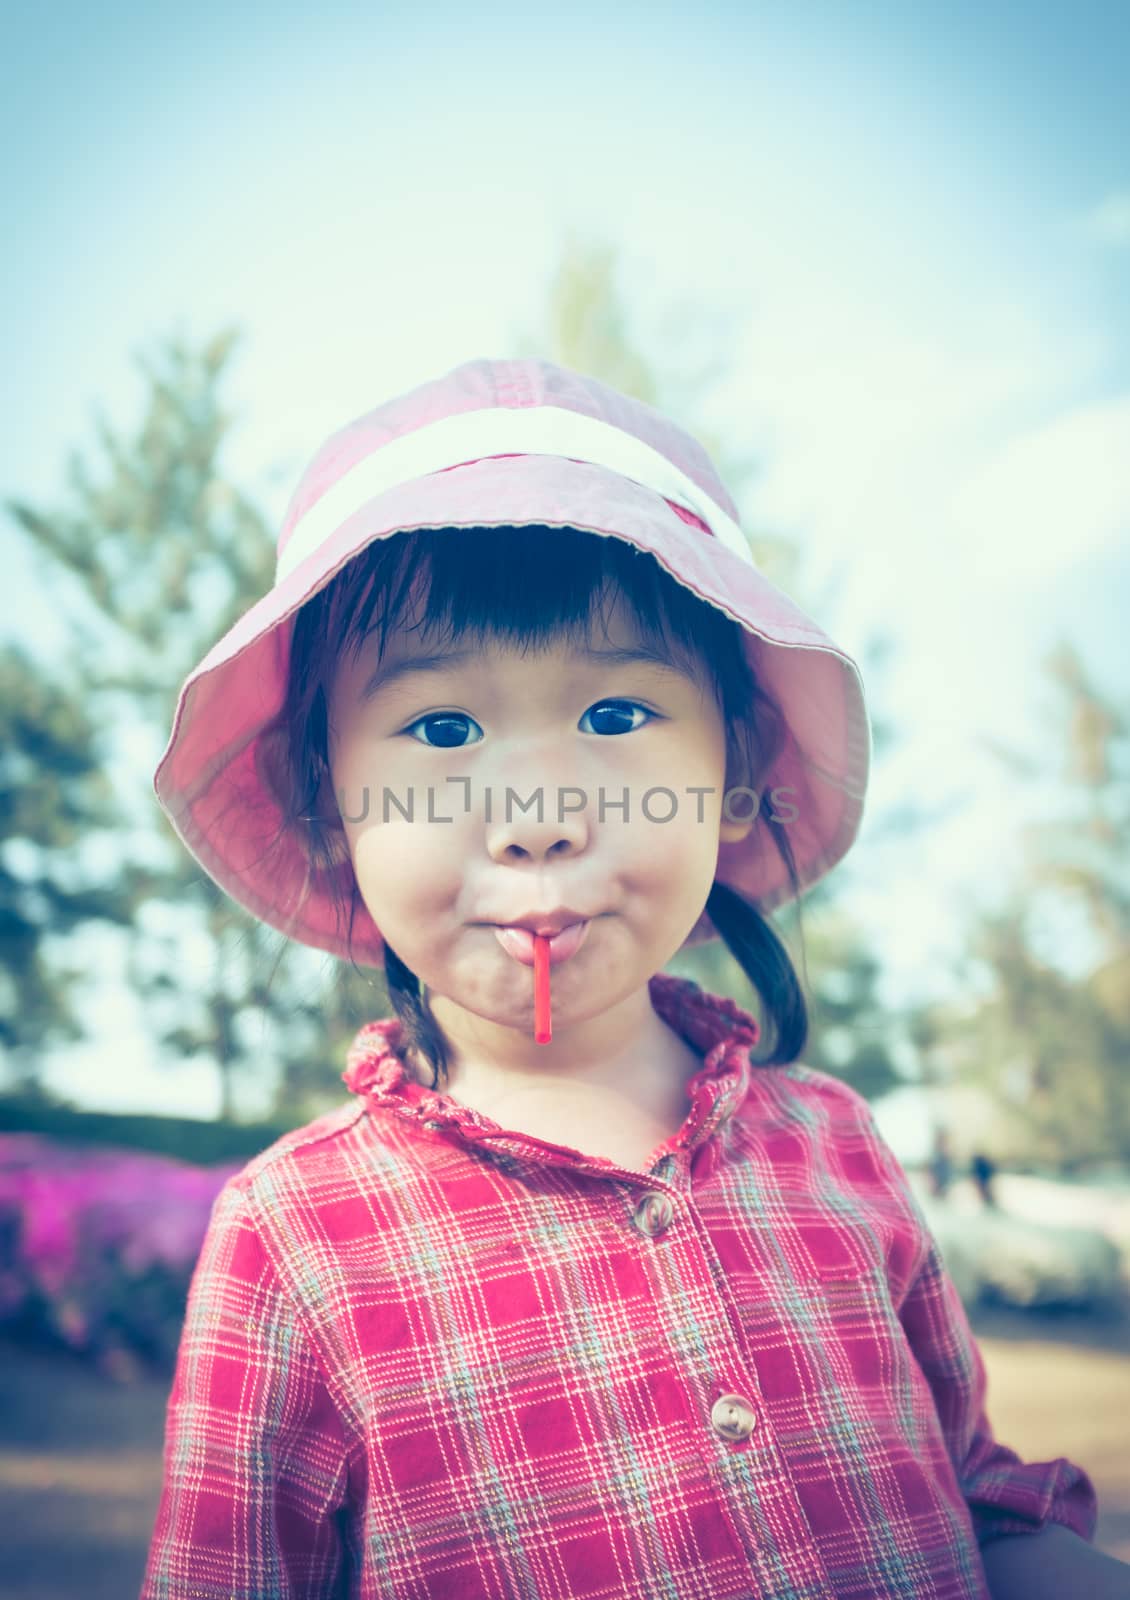 Cute little asian girl eating a lollipop on nature background in summertime. Child wearing pink hat and looking at camera. Cross process. Vintage style.